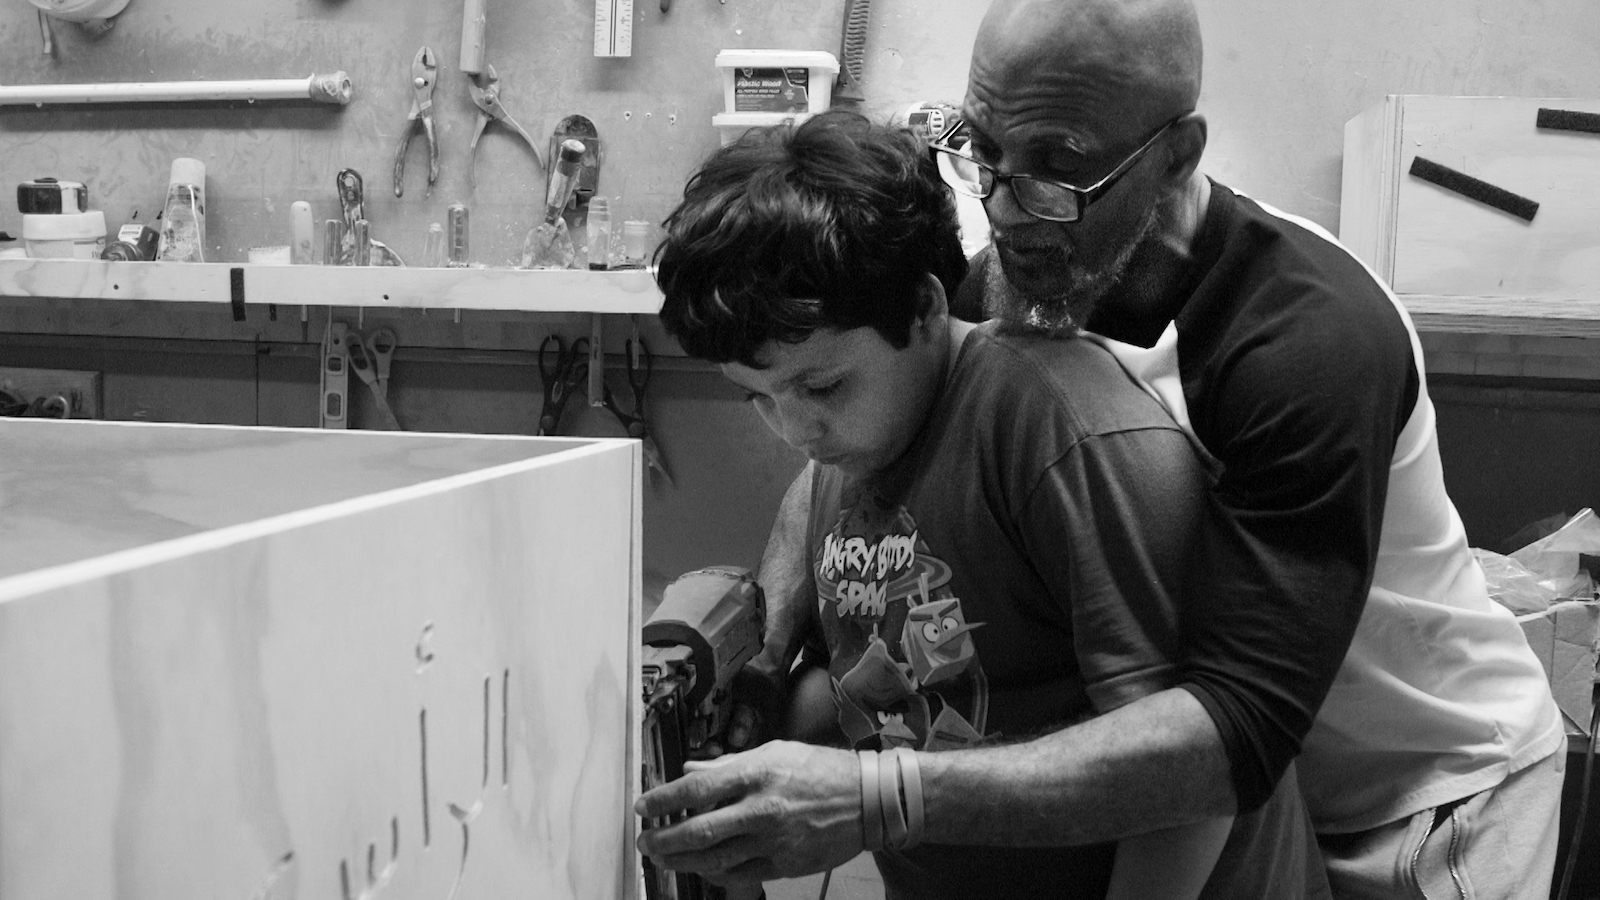 An older man has his arms around a young boy as he teaches him carpentry